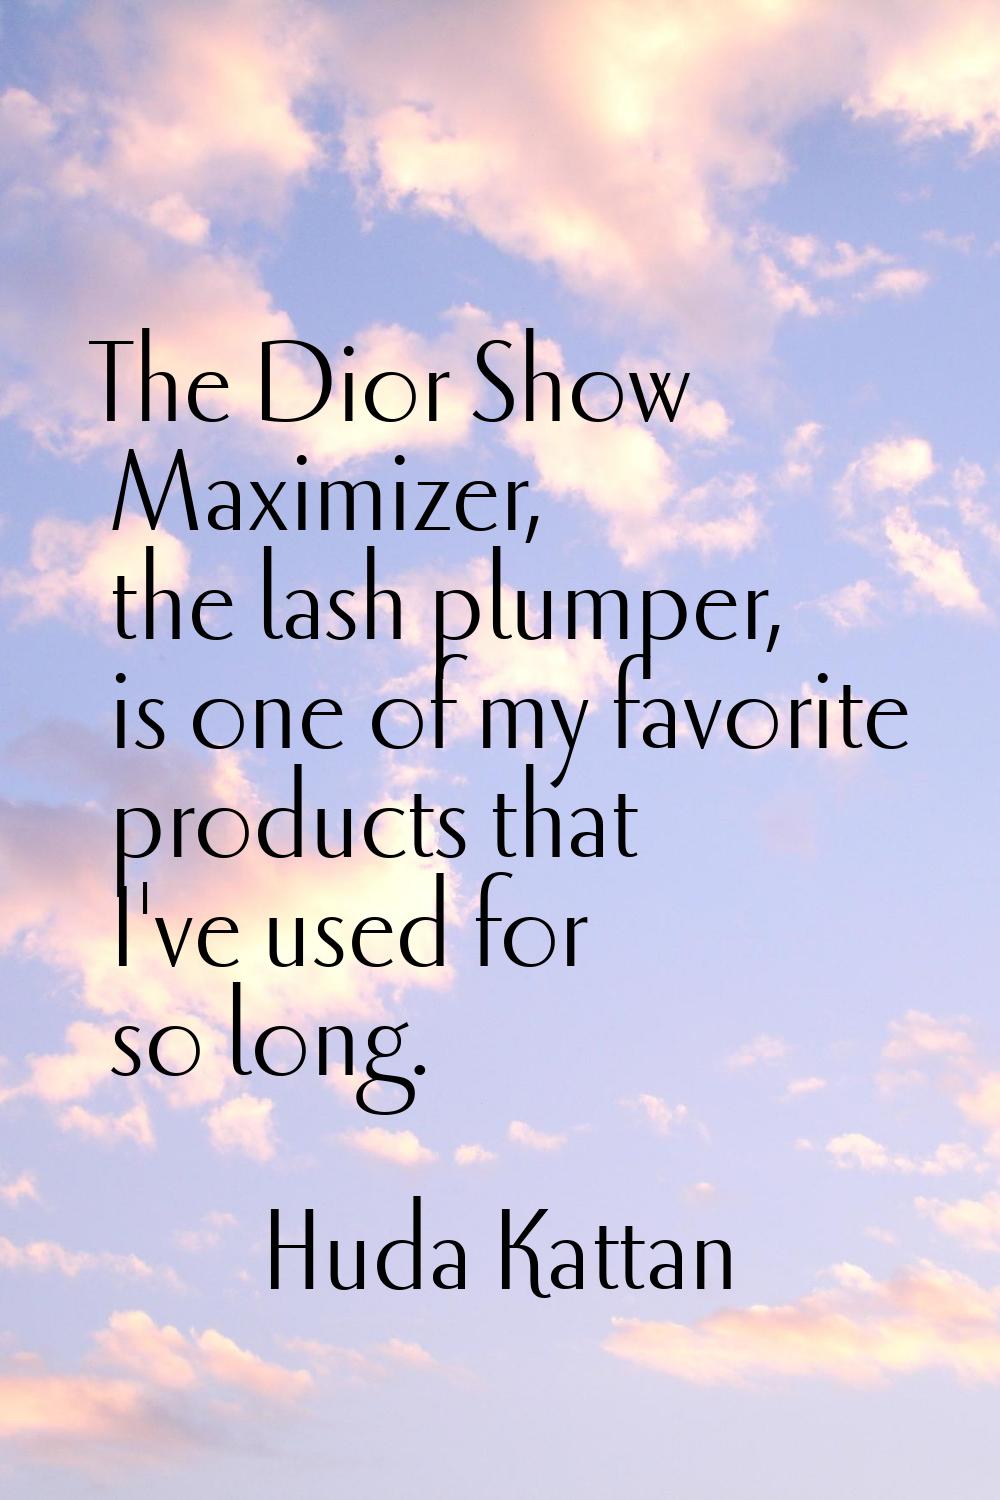 The Dior Show Maximizer, the lash plumper, is one of my favorite products that I've used for so lon